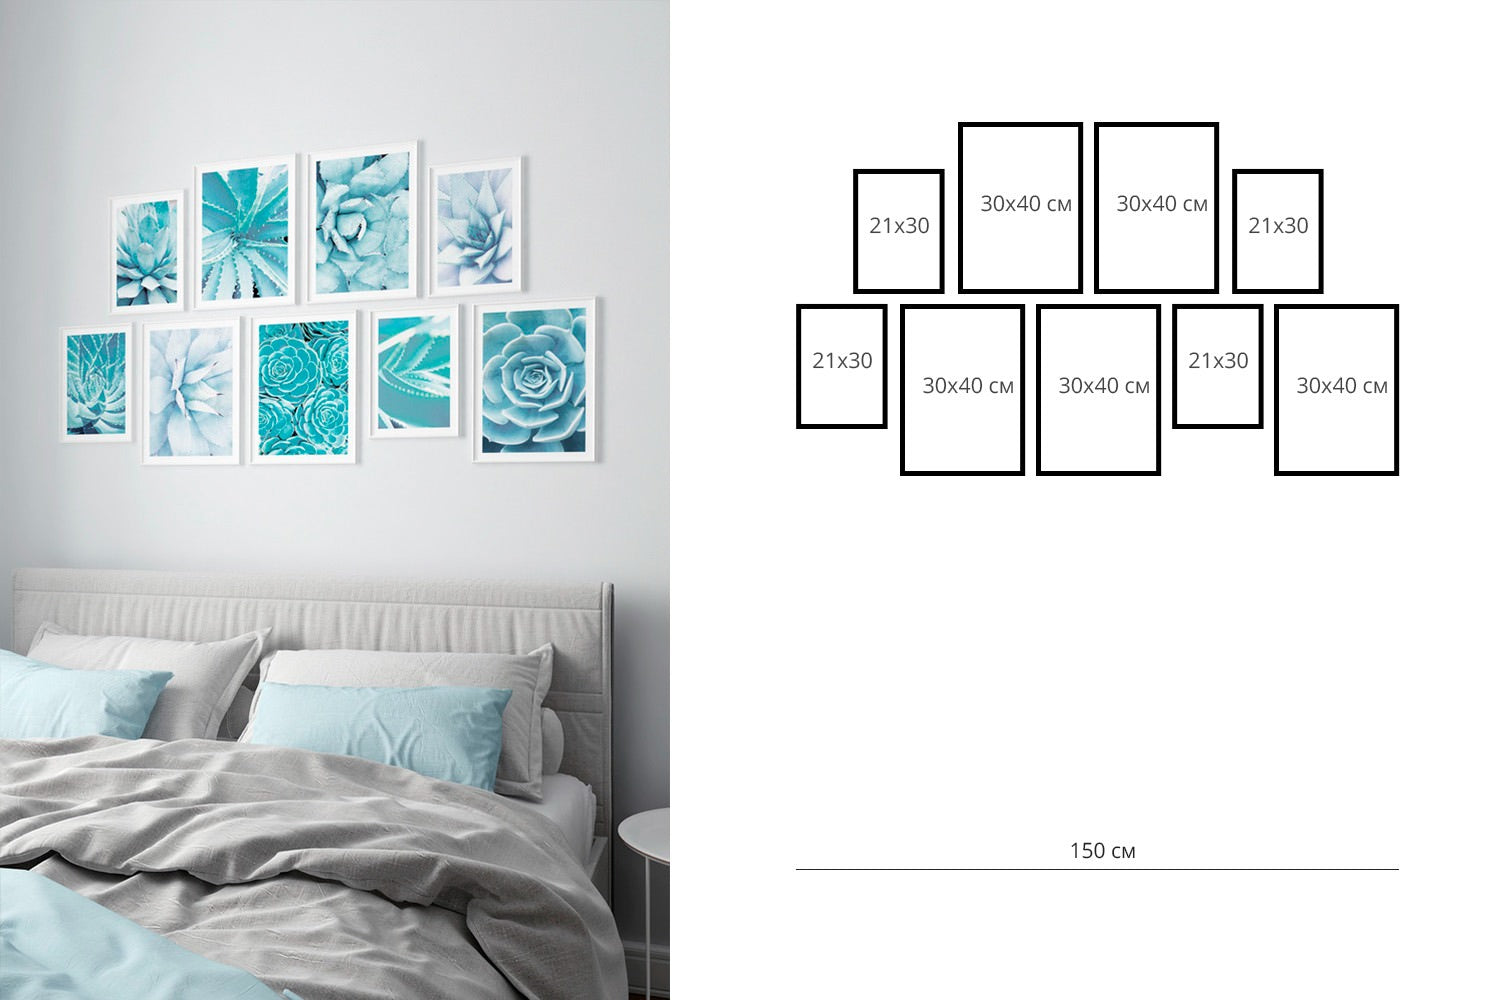 nine posters wall gallery layout aesthetic posters arrangement template wall decor ideas roomtery